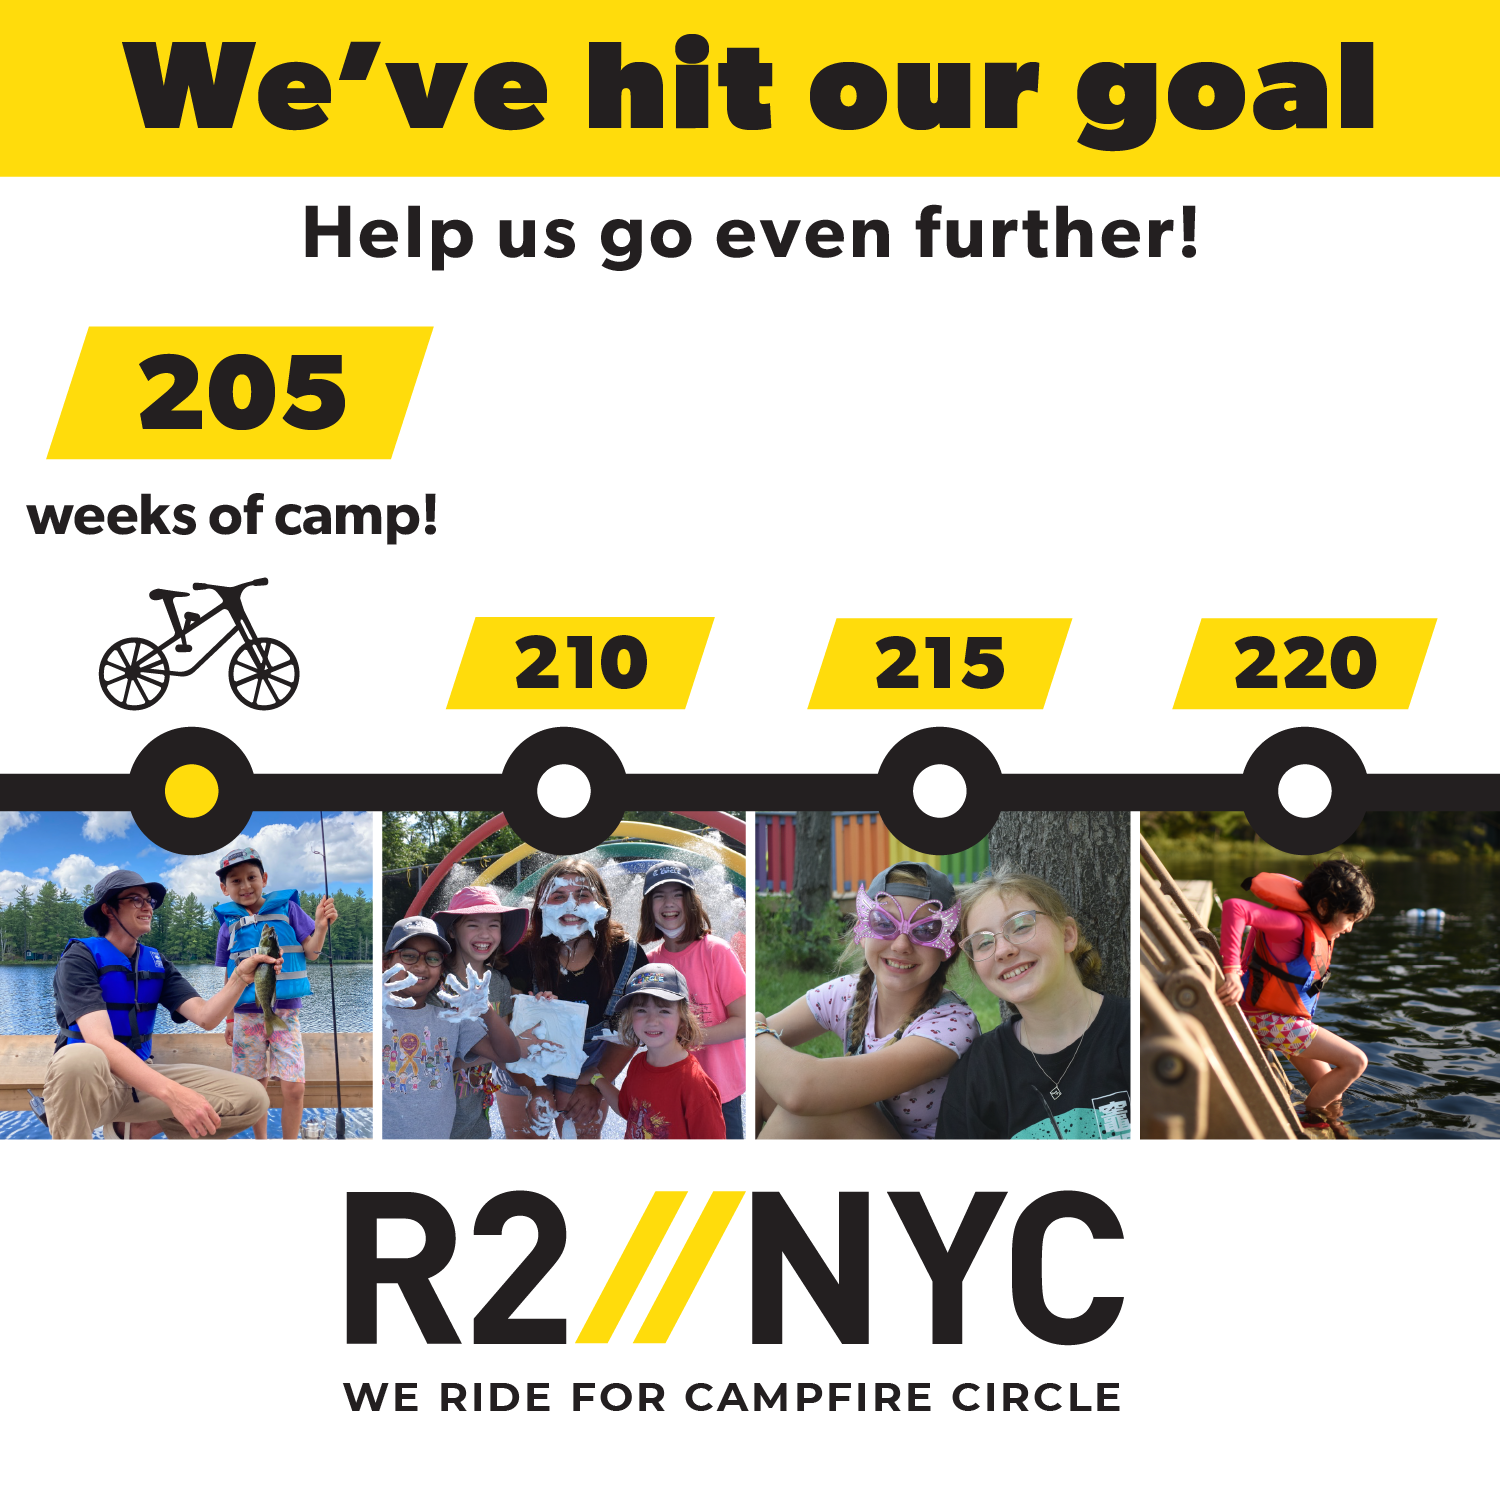 R2NYC We ride for Campfire Circle. We have raised enough funds to provide 205 weeks of camp